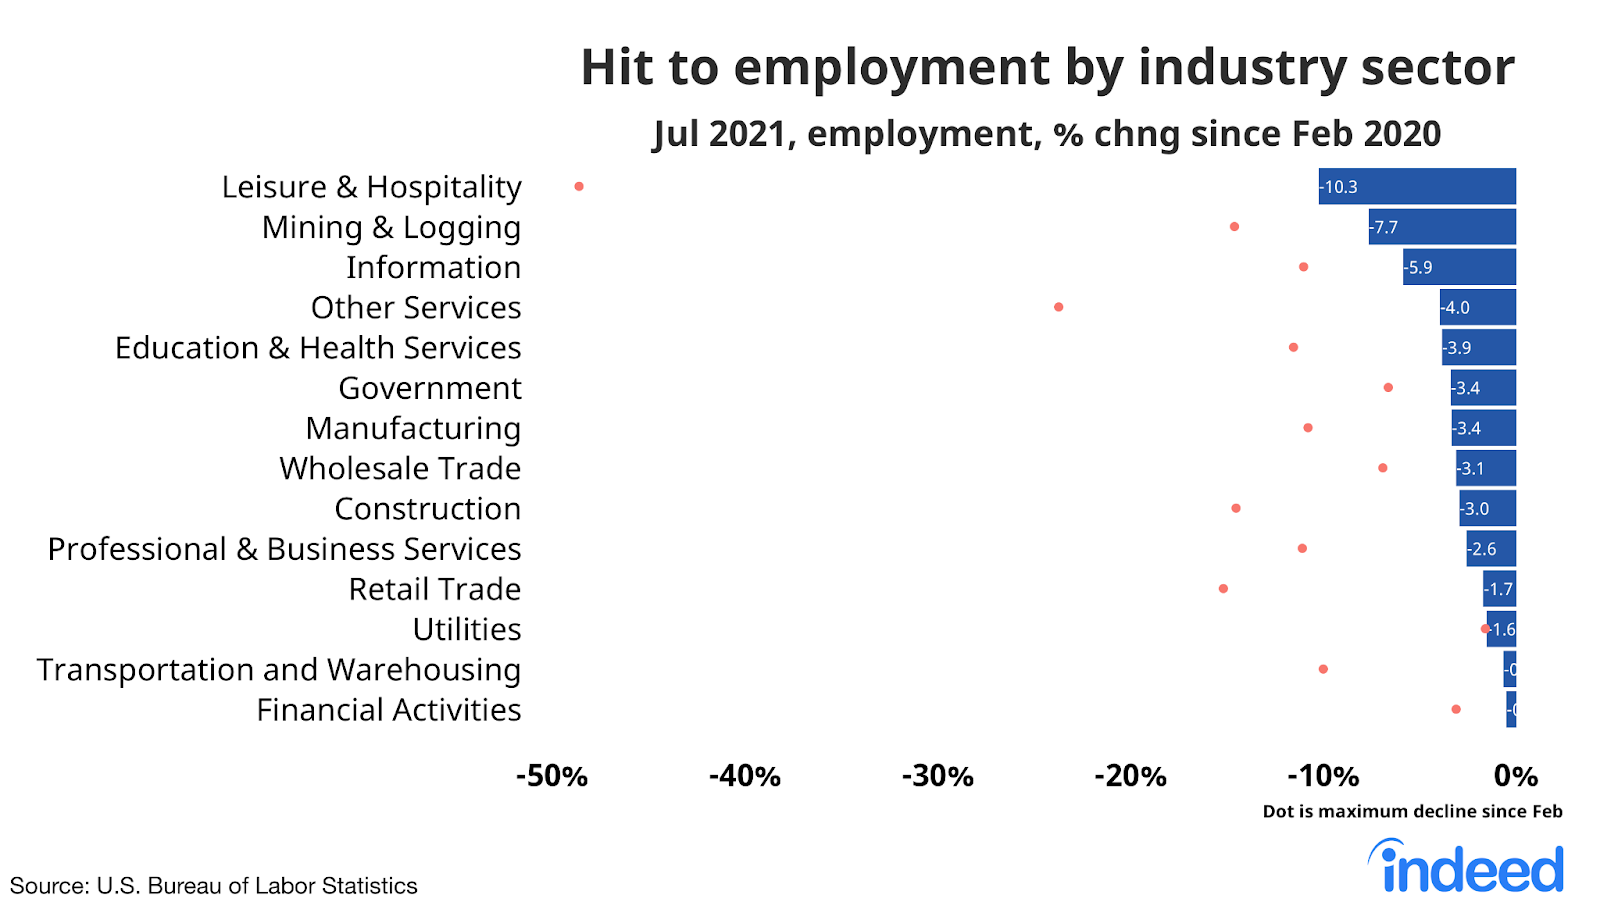 Table showing hit to employment by industry sector, comparing the percentage change in employment from February 2020 to July 2021.